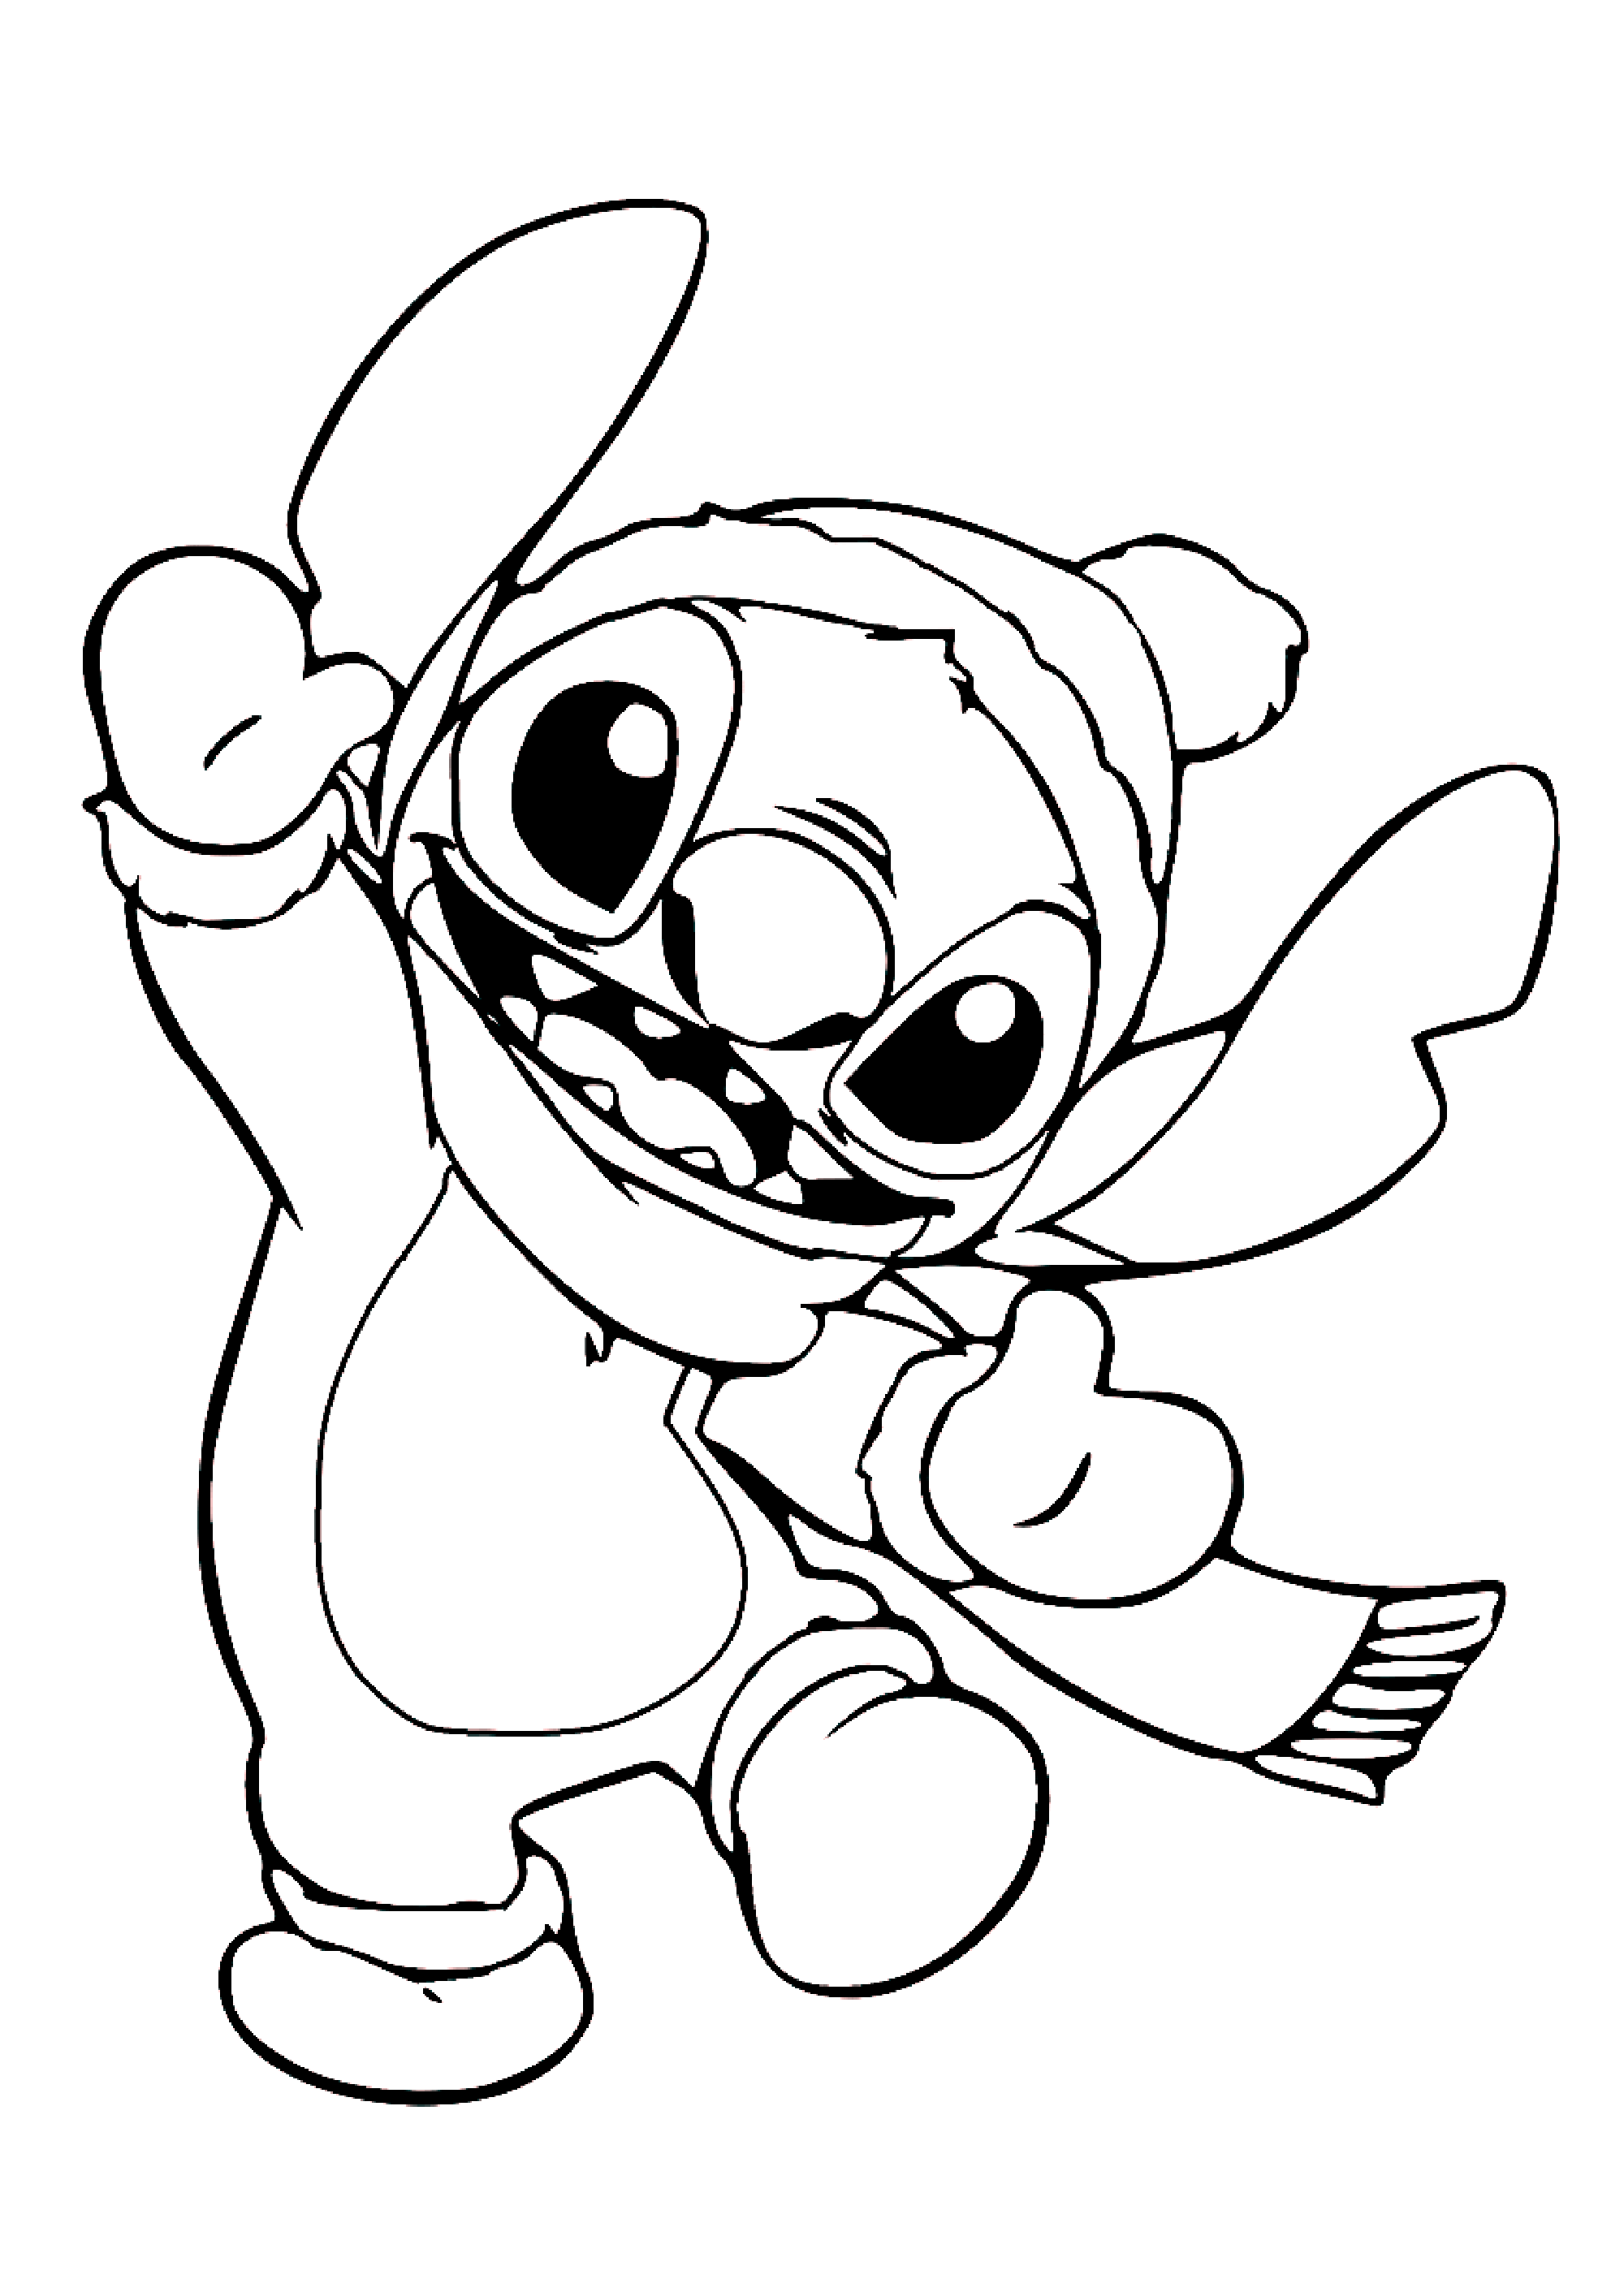 Lilo And Stitch Coloring Pages For Children Lilo And Stitch Kids